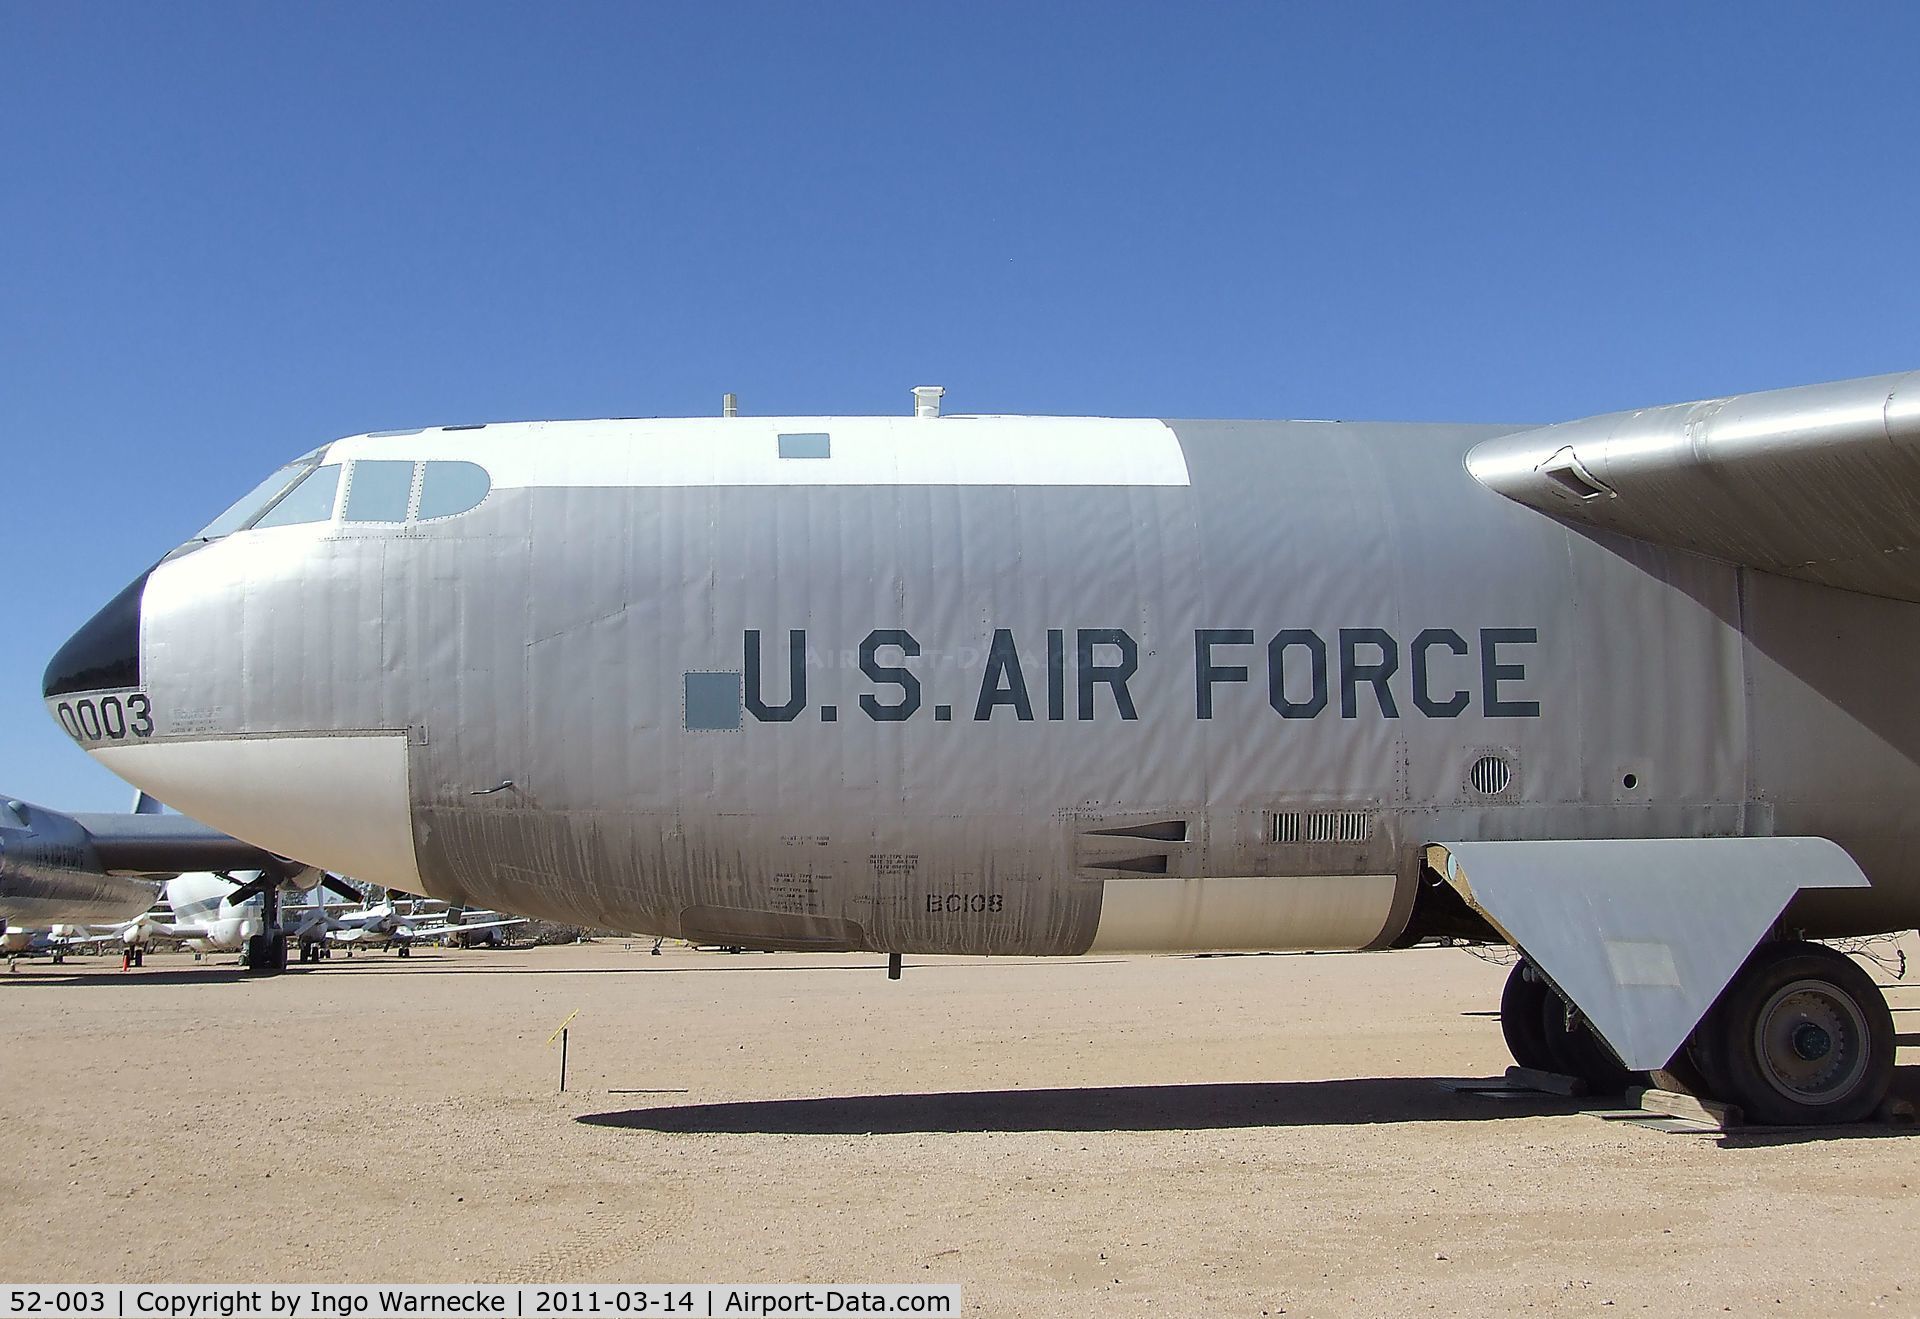 52-003, 1952 Boeing NB-52A Stratofortress C/N 16493, Boeing NB-52A Stratofortress at the Pima Air & Space Museum, Tucson AZ